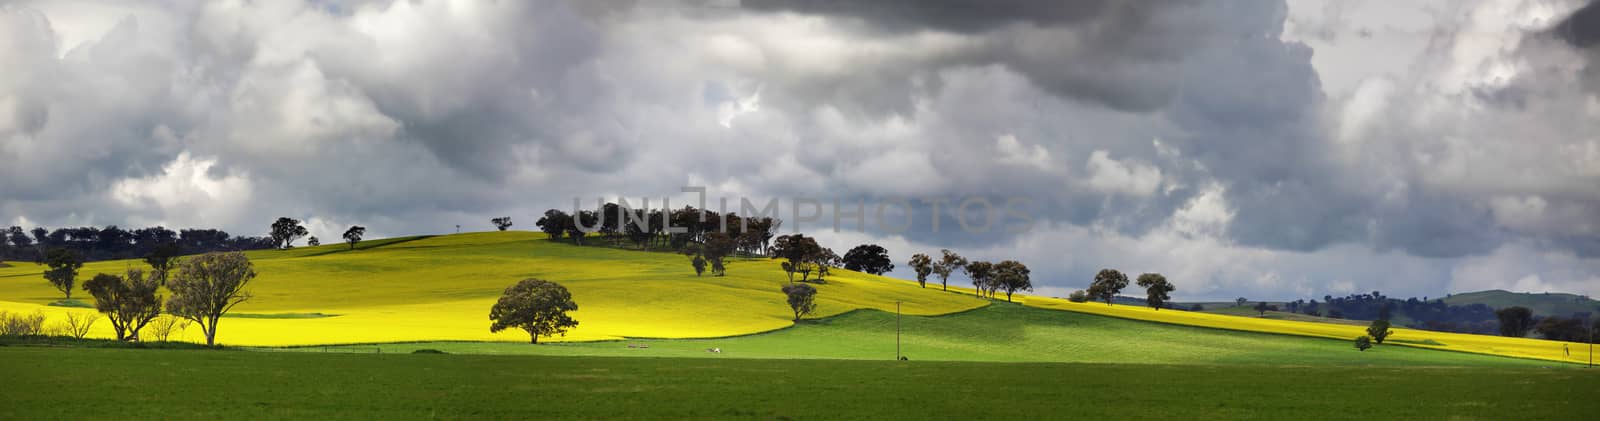 Picturesque views from Sunnyside Road, Cowra.  Menacing storm clouds over undulating fields of flowering canola  now and then give way to golden sunshine which lights the landscape in light and shadow